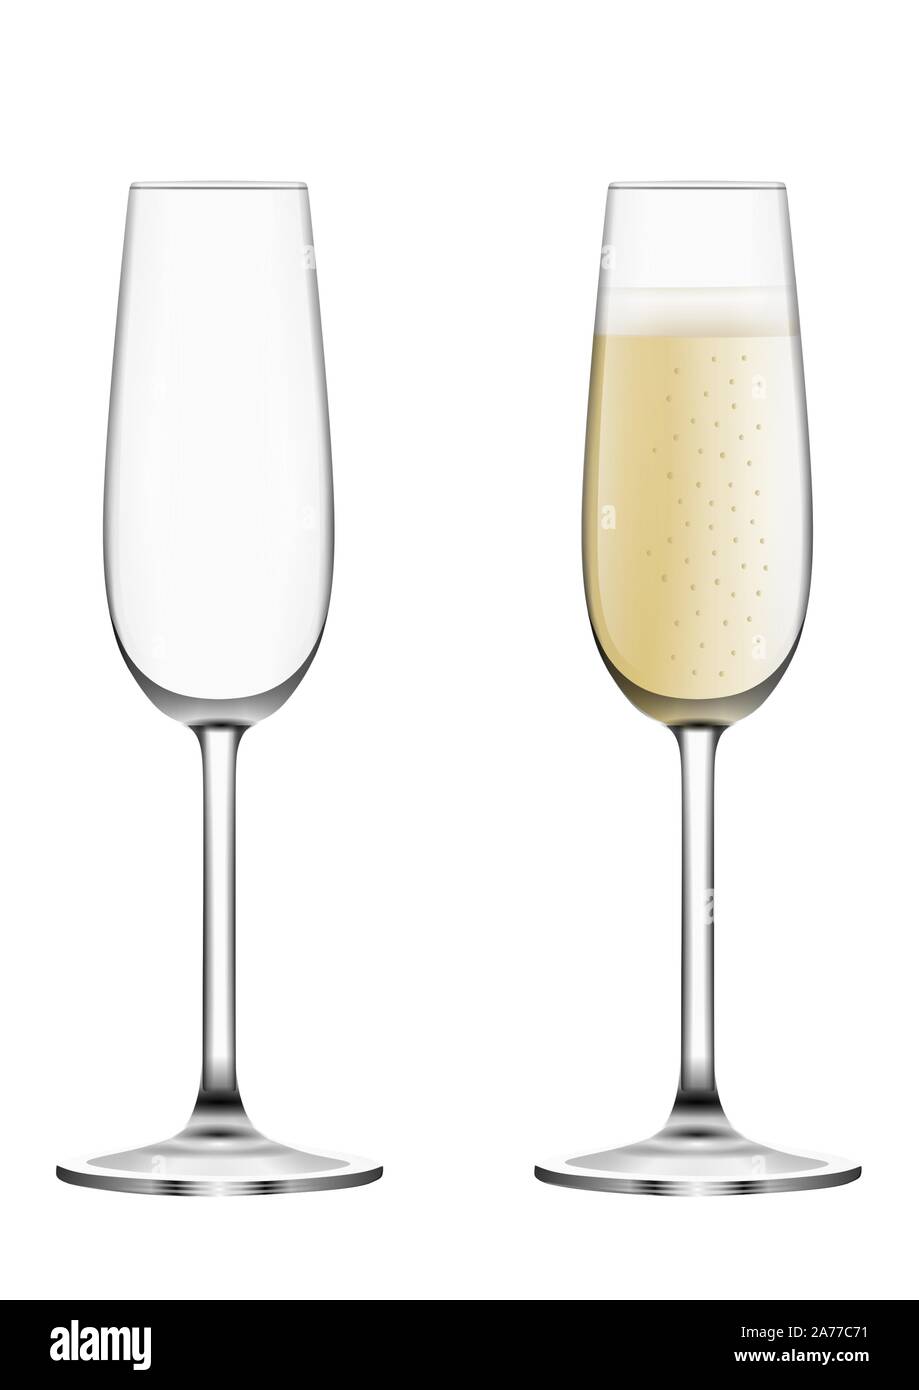 full and empty champagne glass illustration Stock Vector